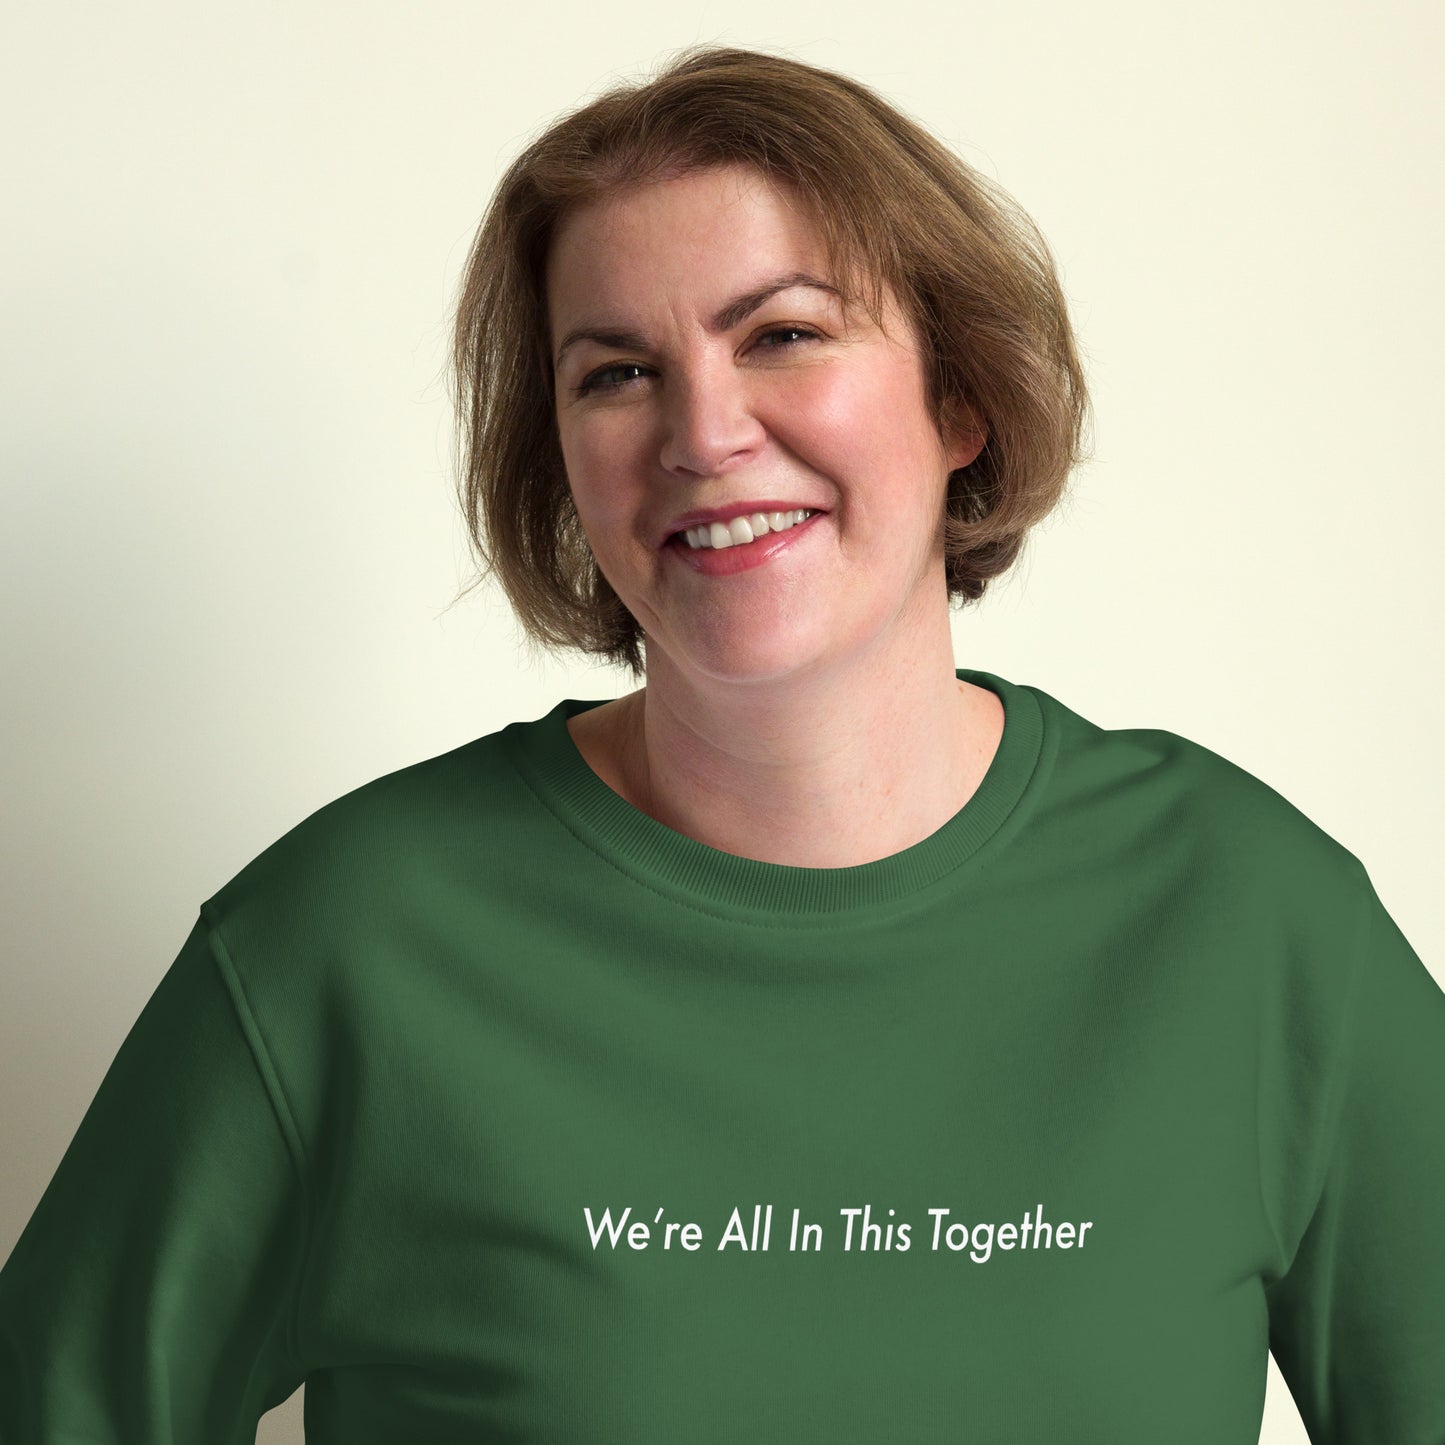 We're All In This Together Women's Oversized Organic Cotton Sweatshirt